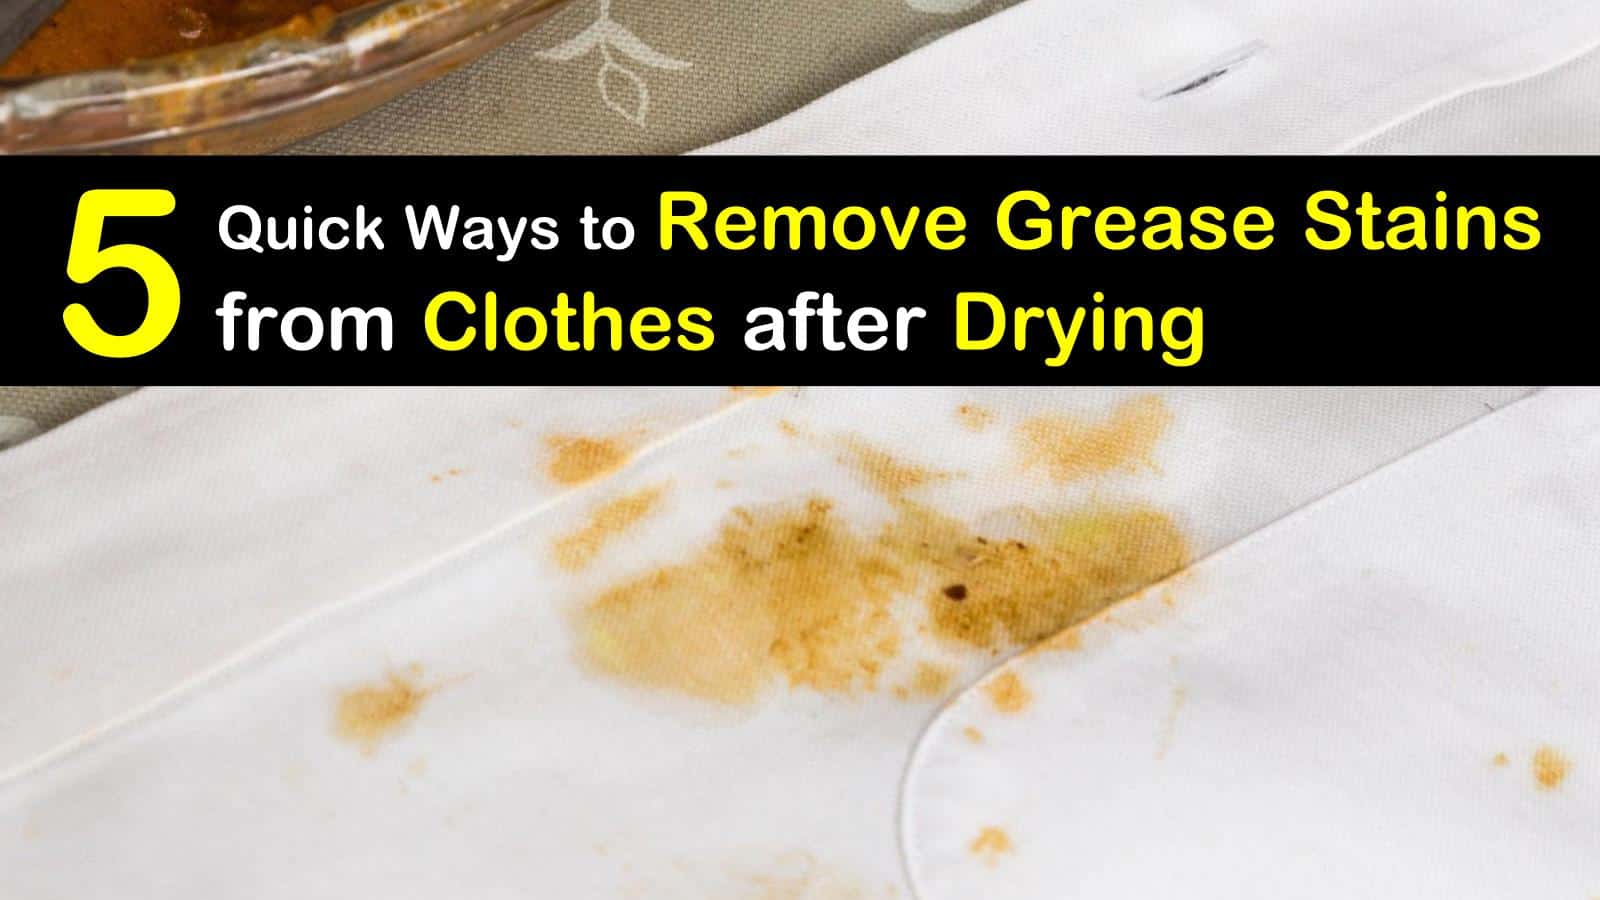 15 Quick Ways to Remove Grease Stains from Clothes after Drying